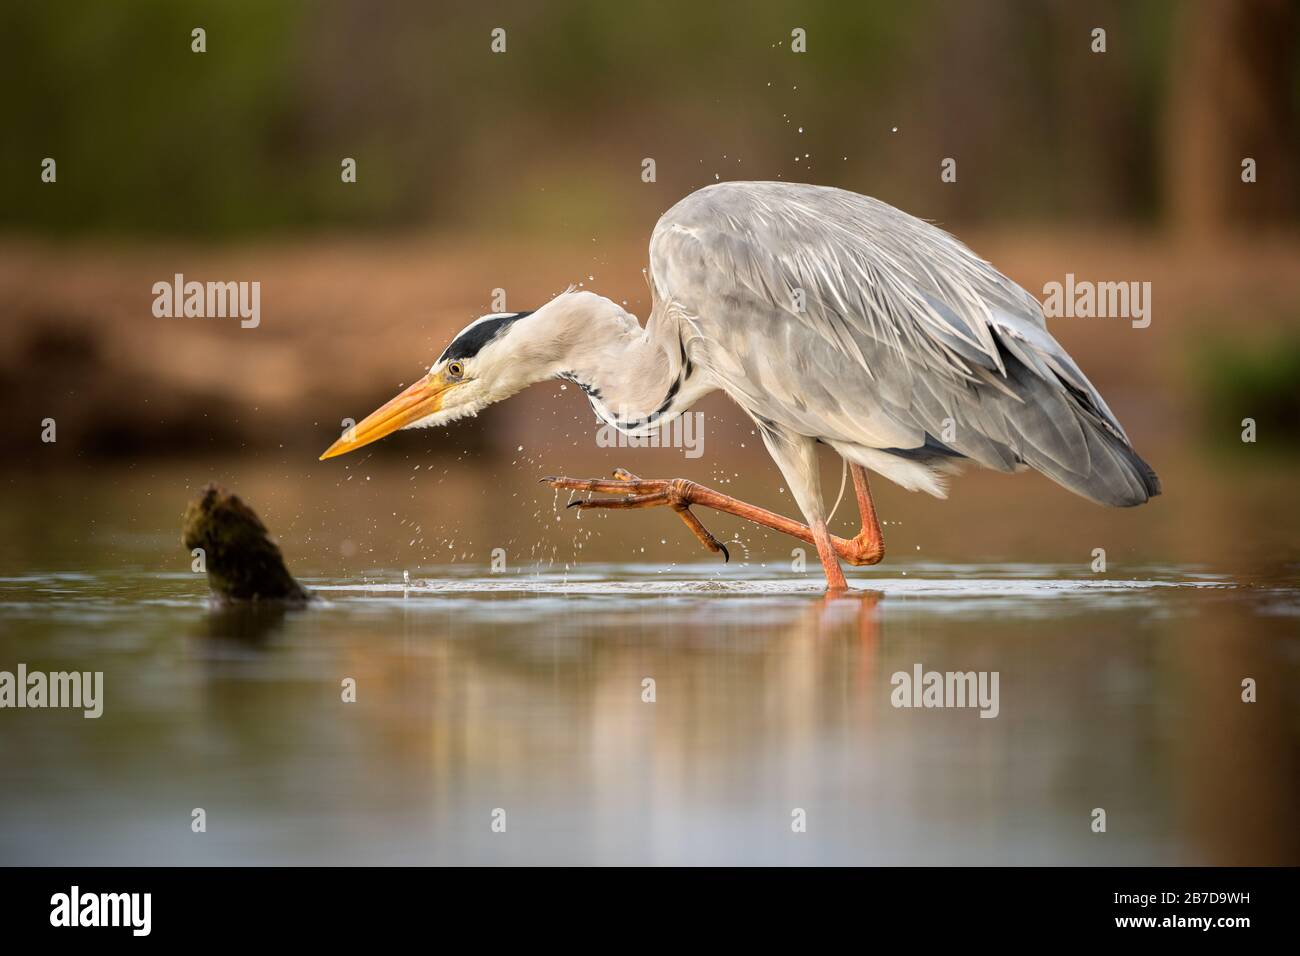 A close up portrait of a Grey heron standing in the water with one foot raised, taken in the Madikwe game Reserve, South Africa. Stock Photo